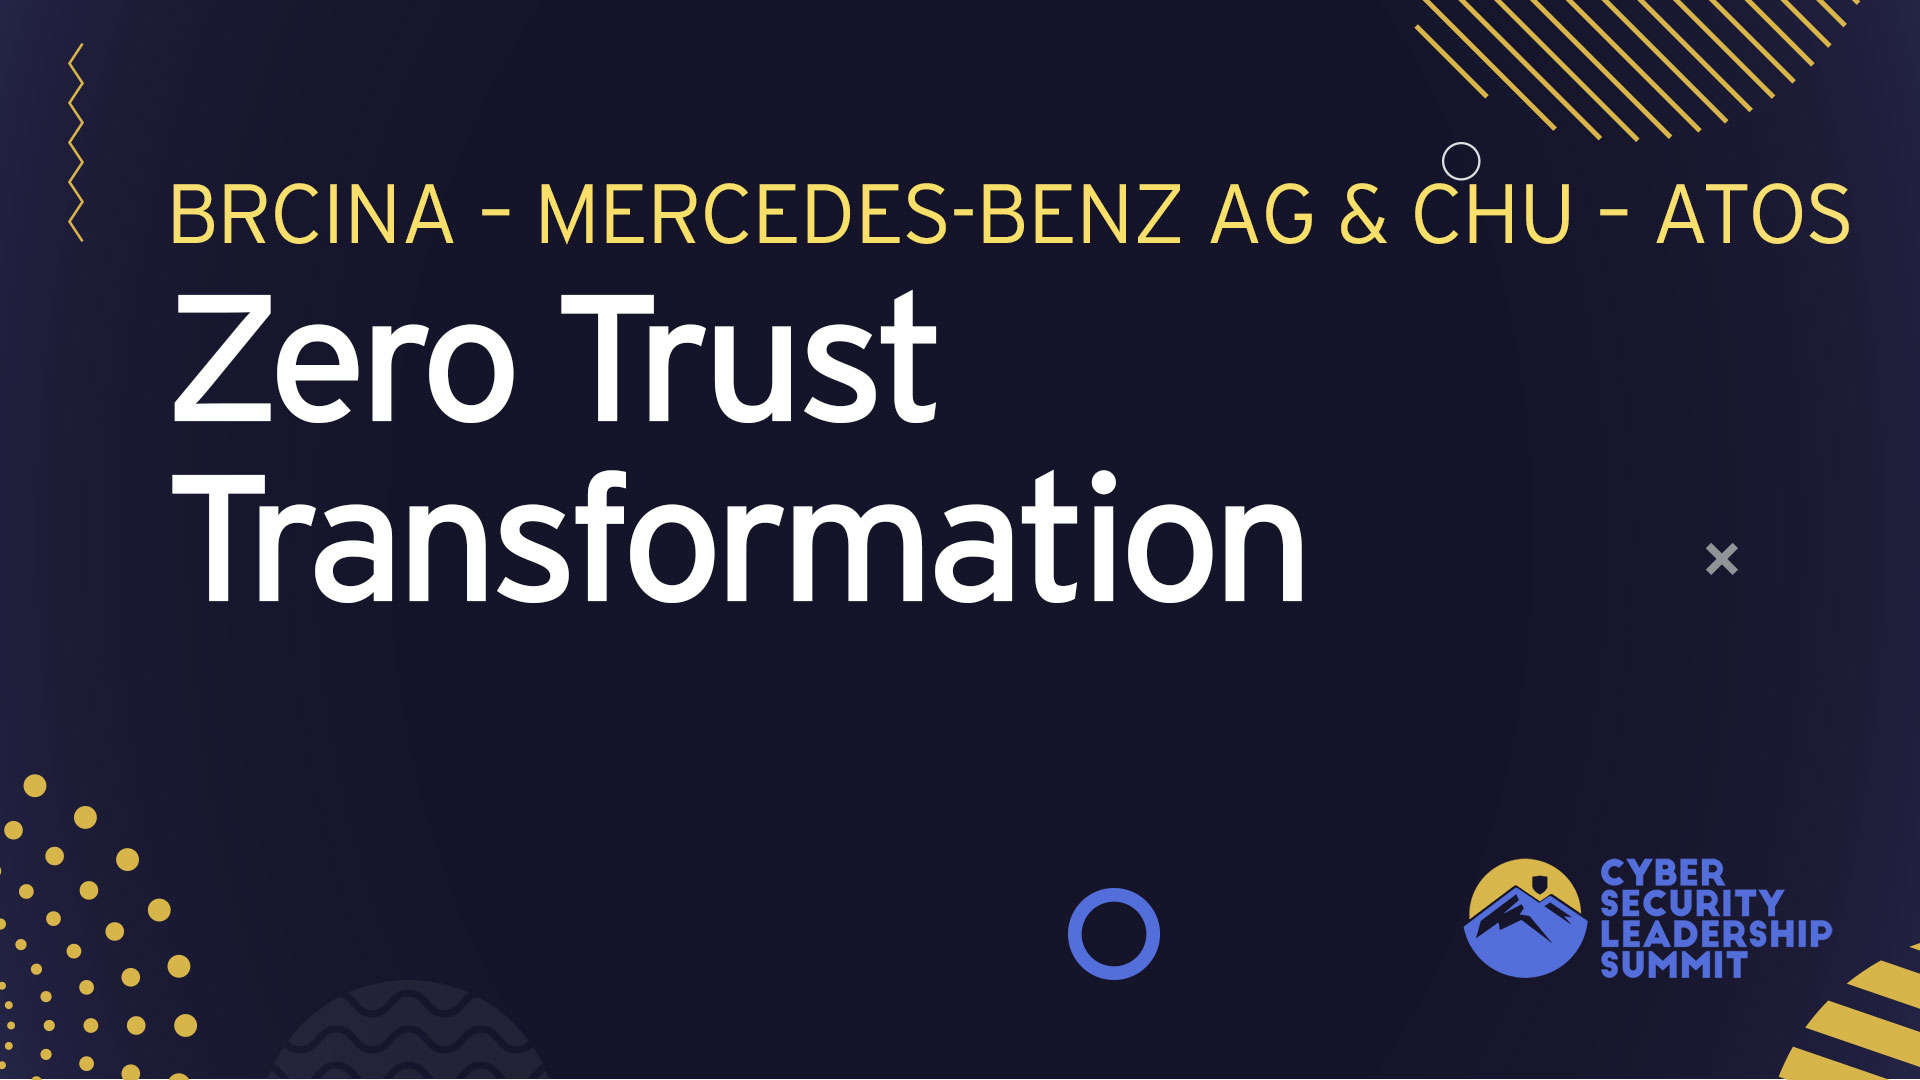 Continuous Zero Trust Transformation using a Value and Risk Driven Approach